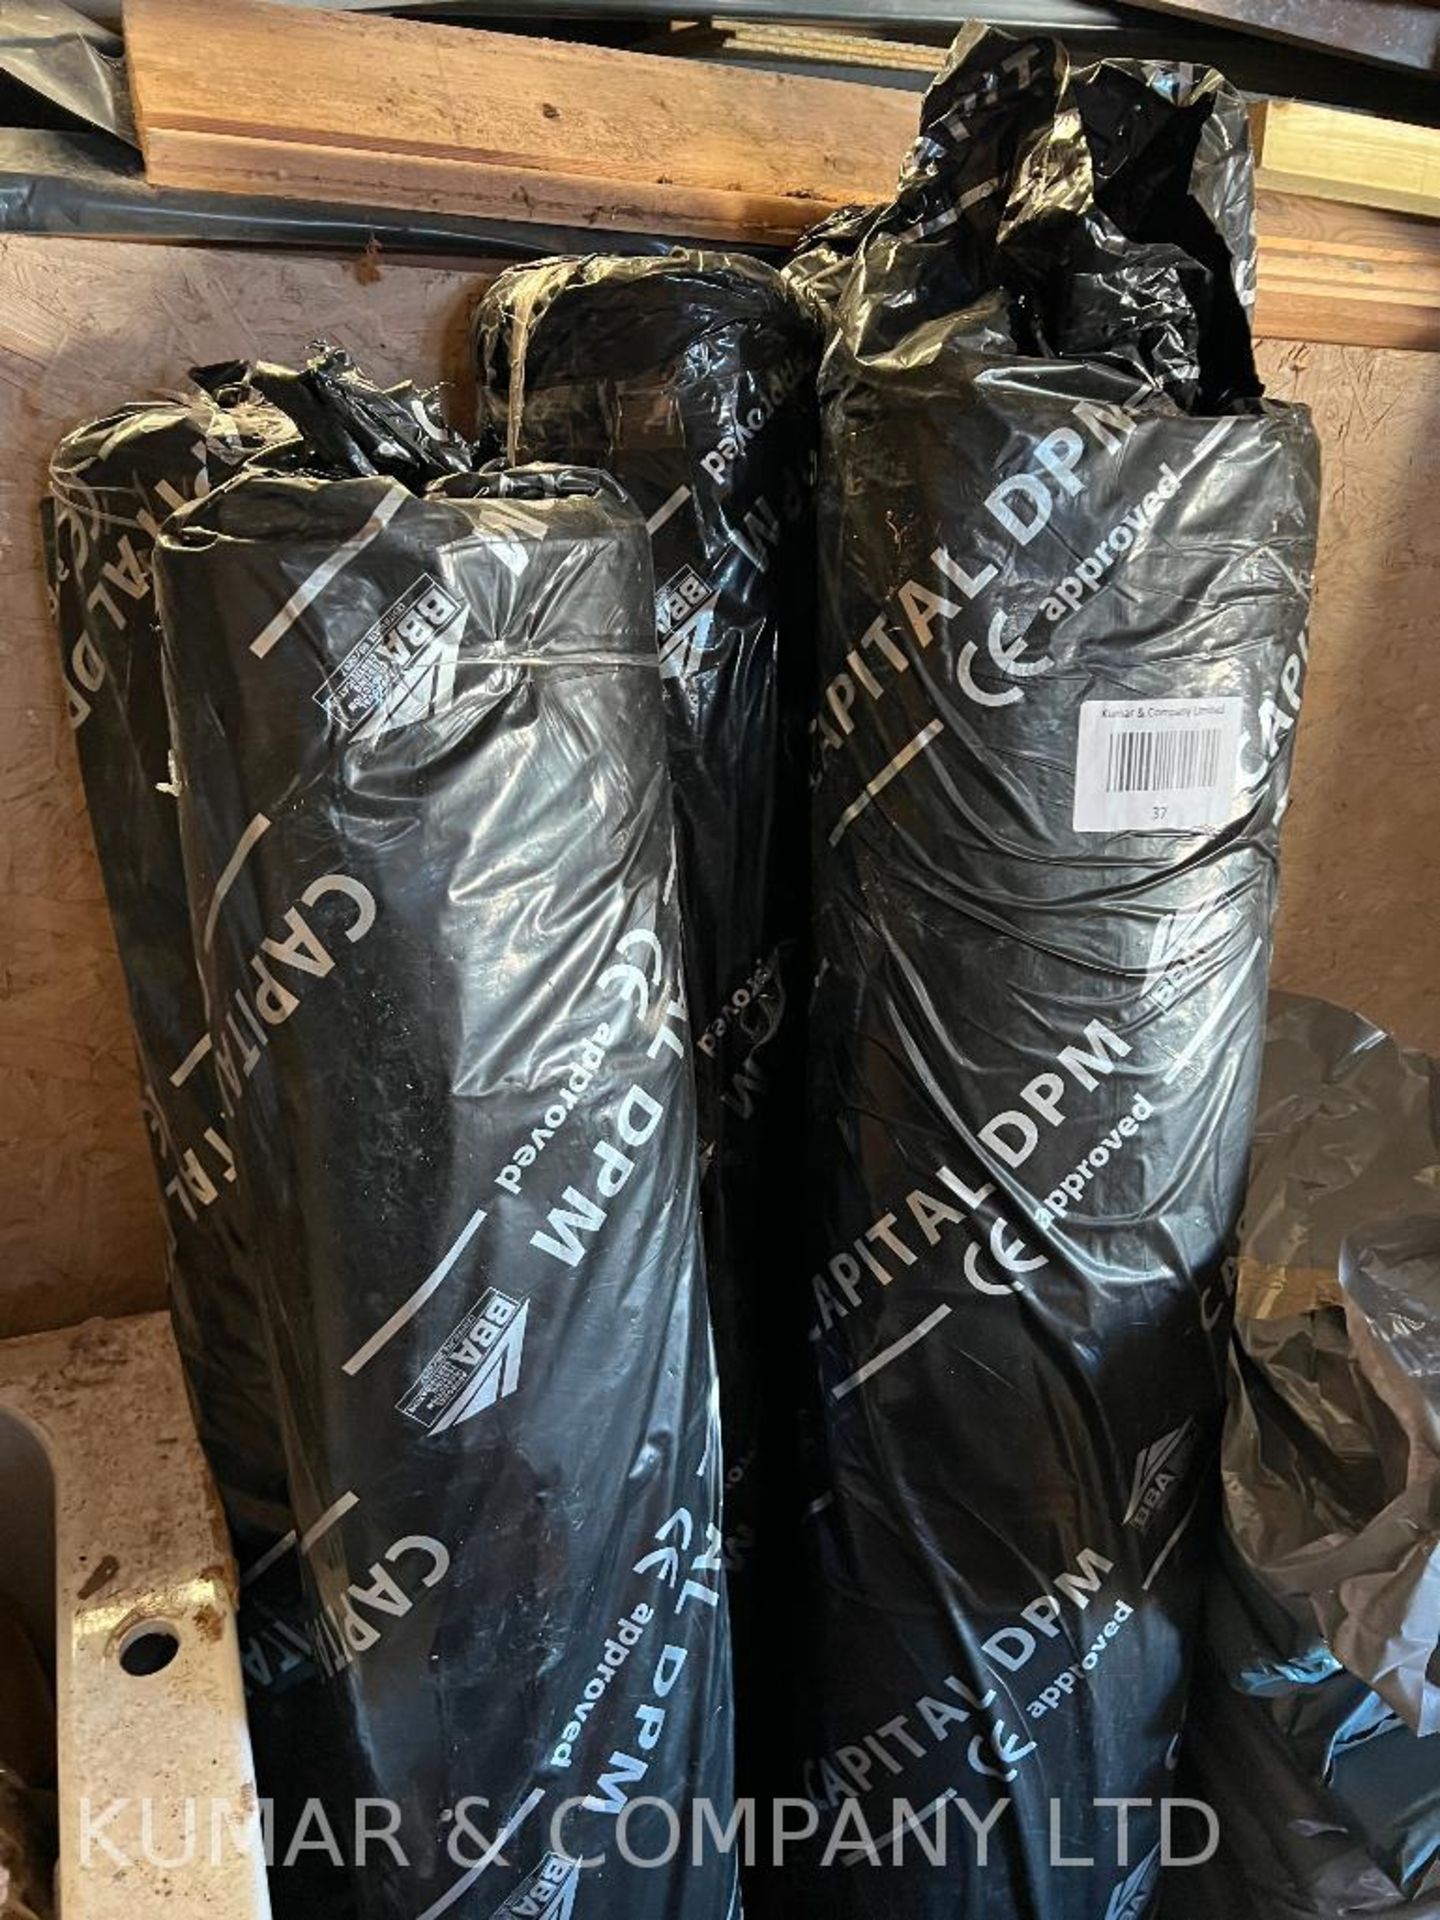 Approximately 10 Bags of New Rubble Sacks and 4 Rolls of Capital DPM Damp Proof Membrane in Black PL - Image 4 of 7